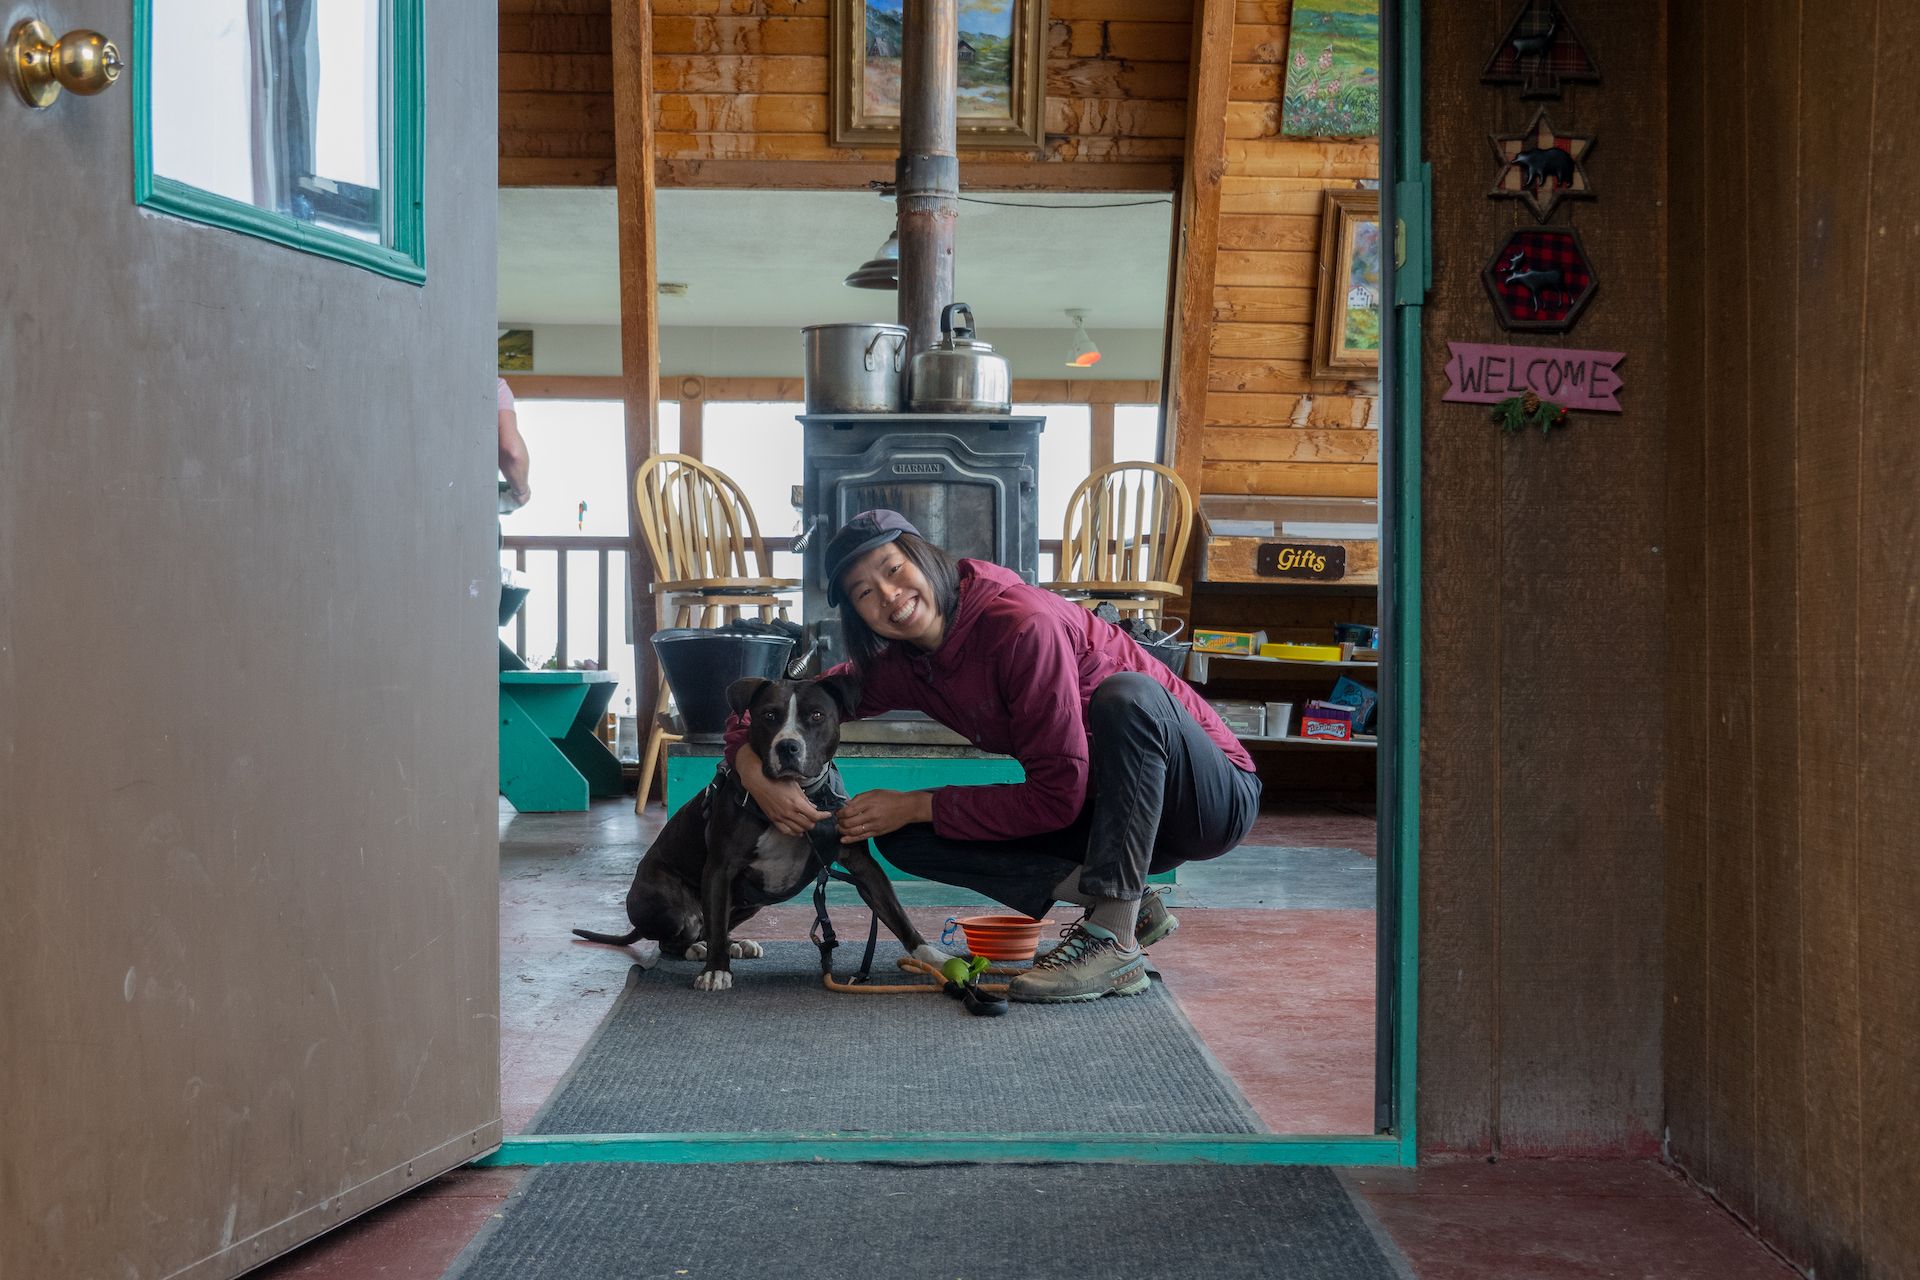 The Hatcher Pass lodge, just down the road from the mine, was a great place to escape the weather. Bonus point: the restaurant is dog-friendly!